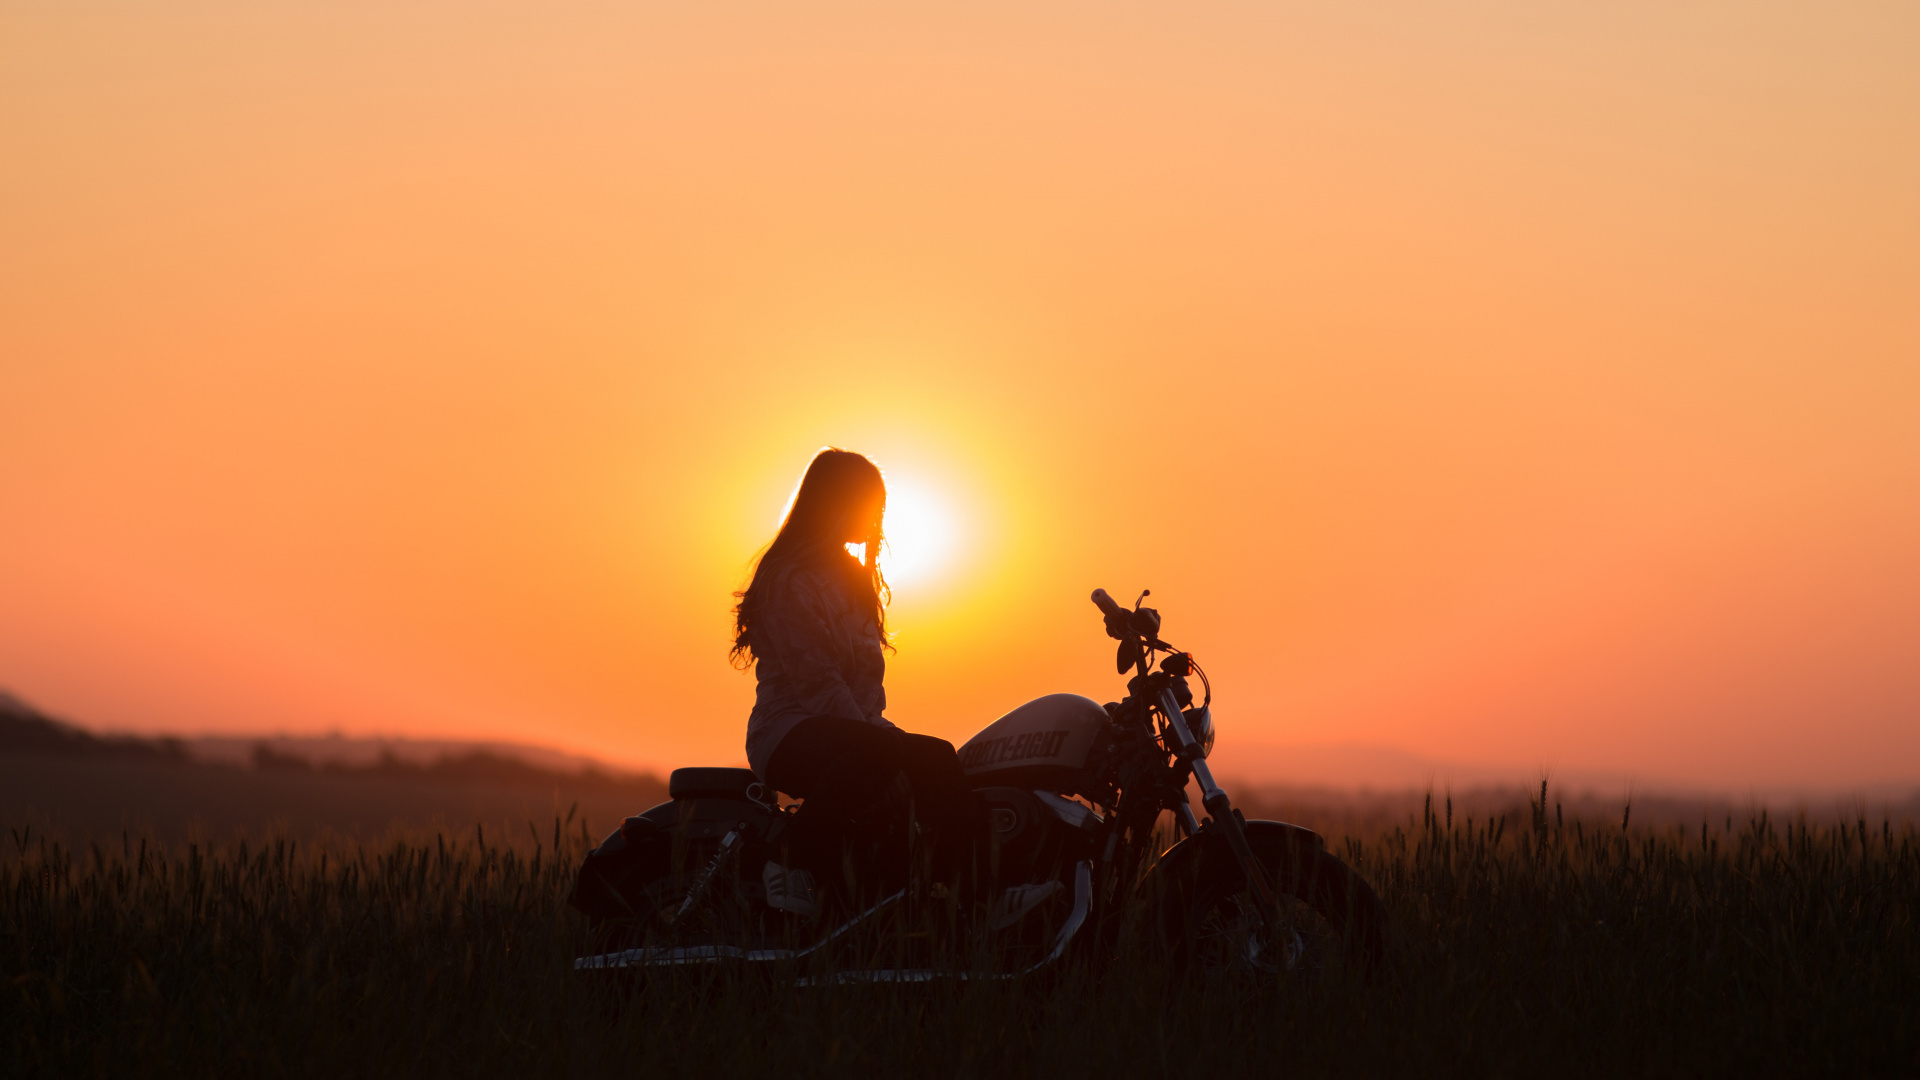 Silhouette of Man Riding Motorcycle During Sunset. Wallpaper in 1920x1080 Resolution